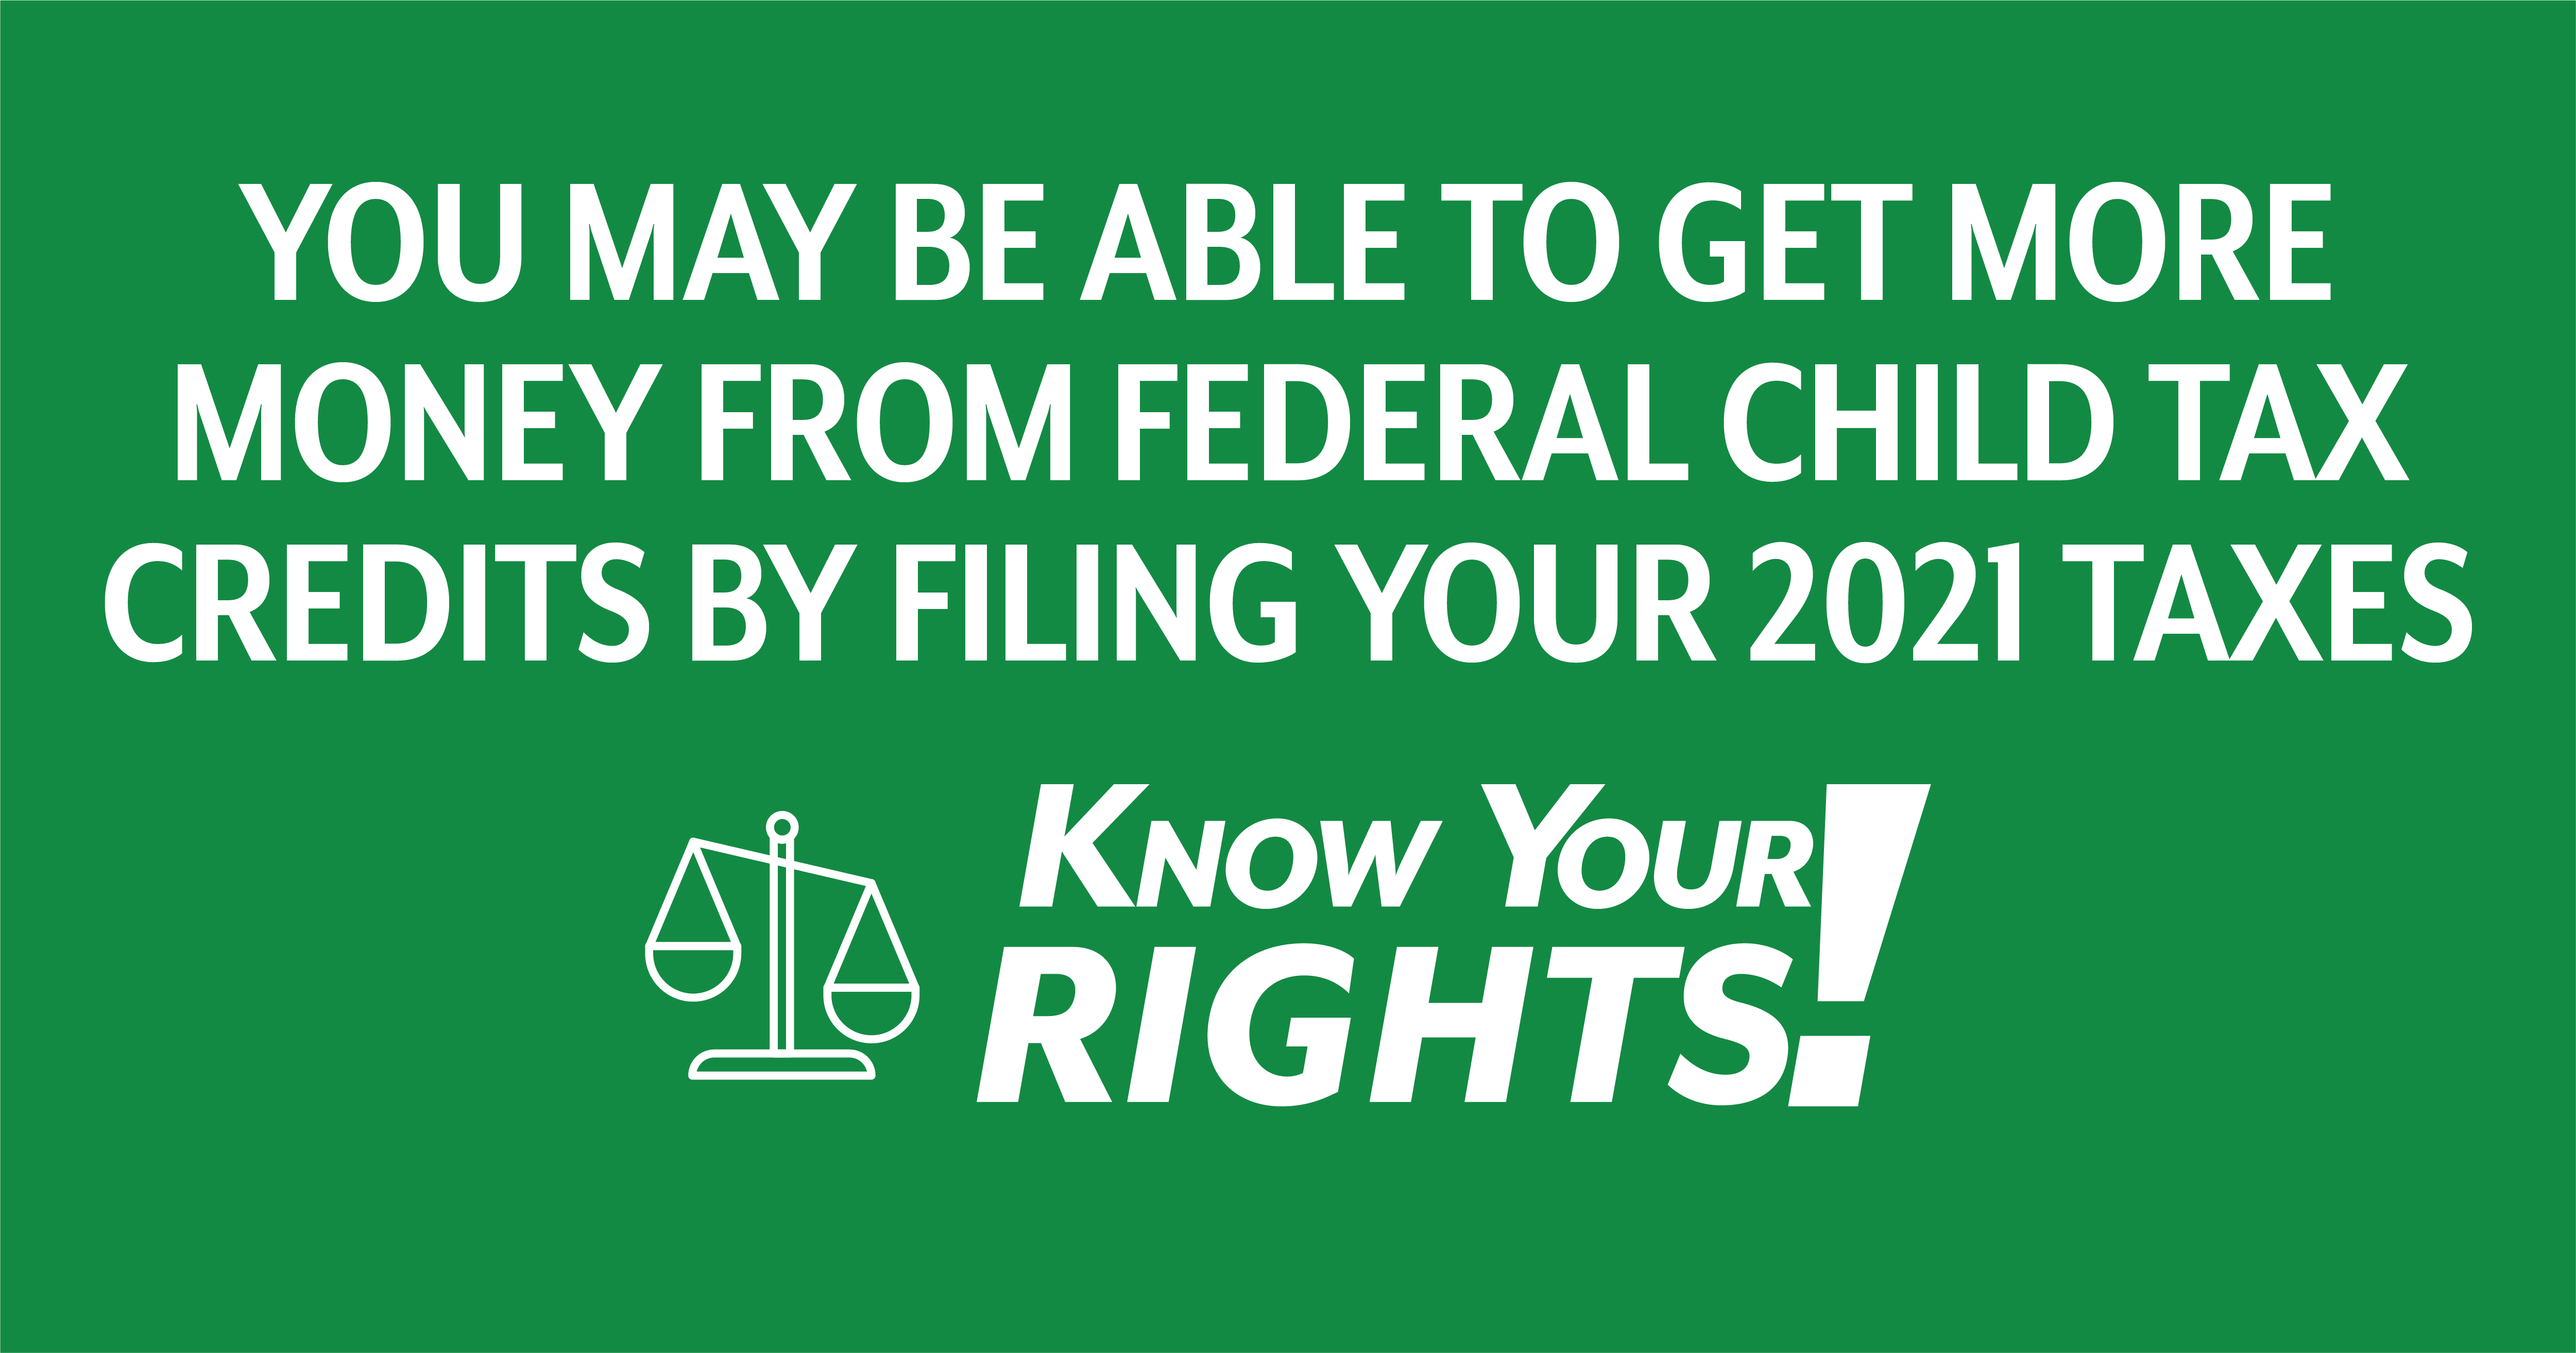 You May Be Able to Get More Money from Federal Child Tax Credits by